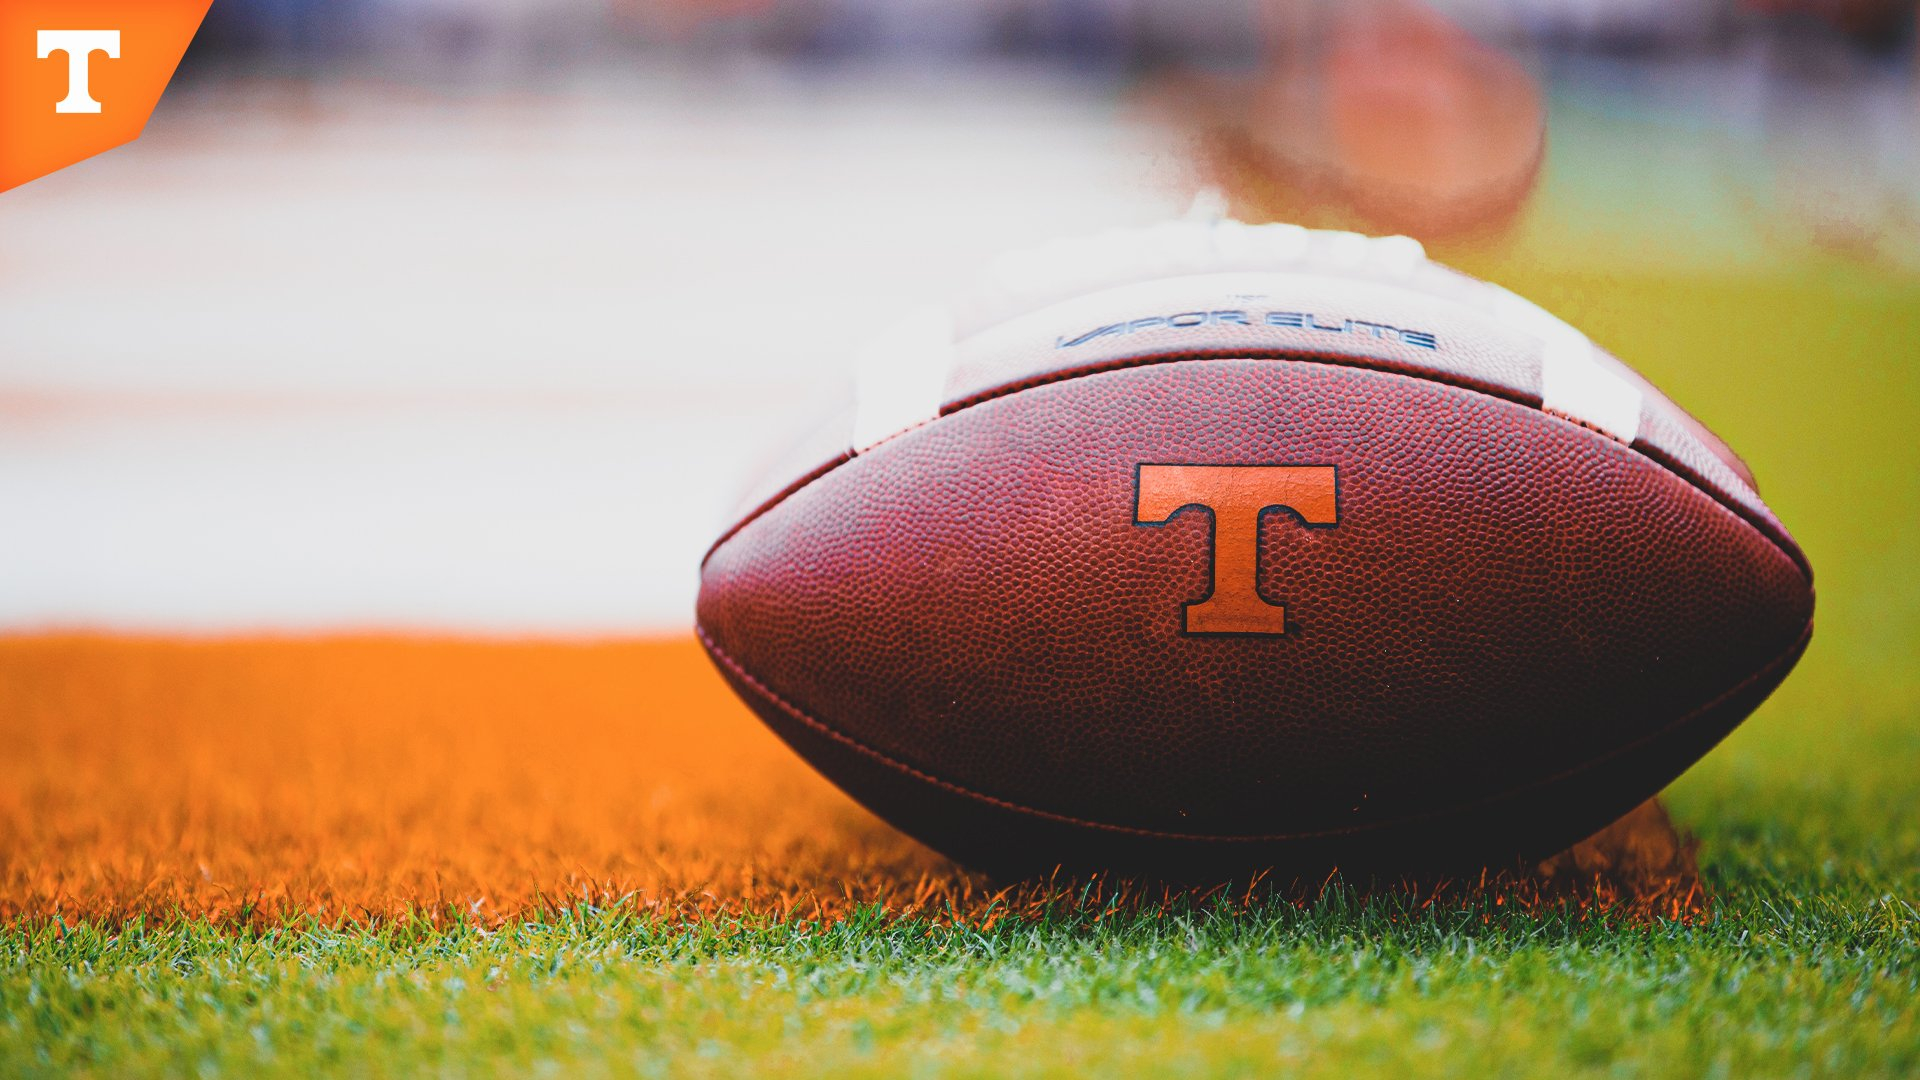 1920x1080 Zoom Backgrounds University of Tennessee Athletics